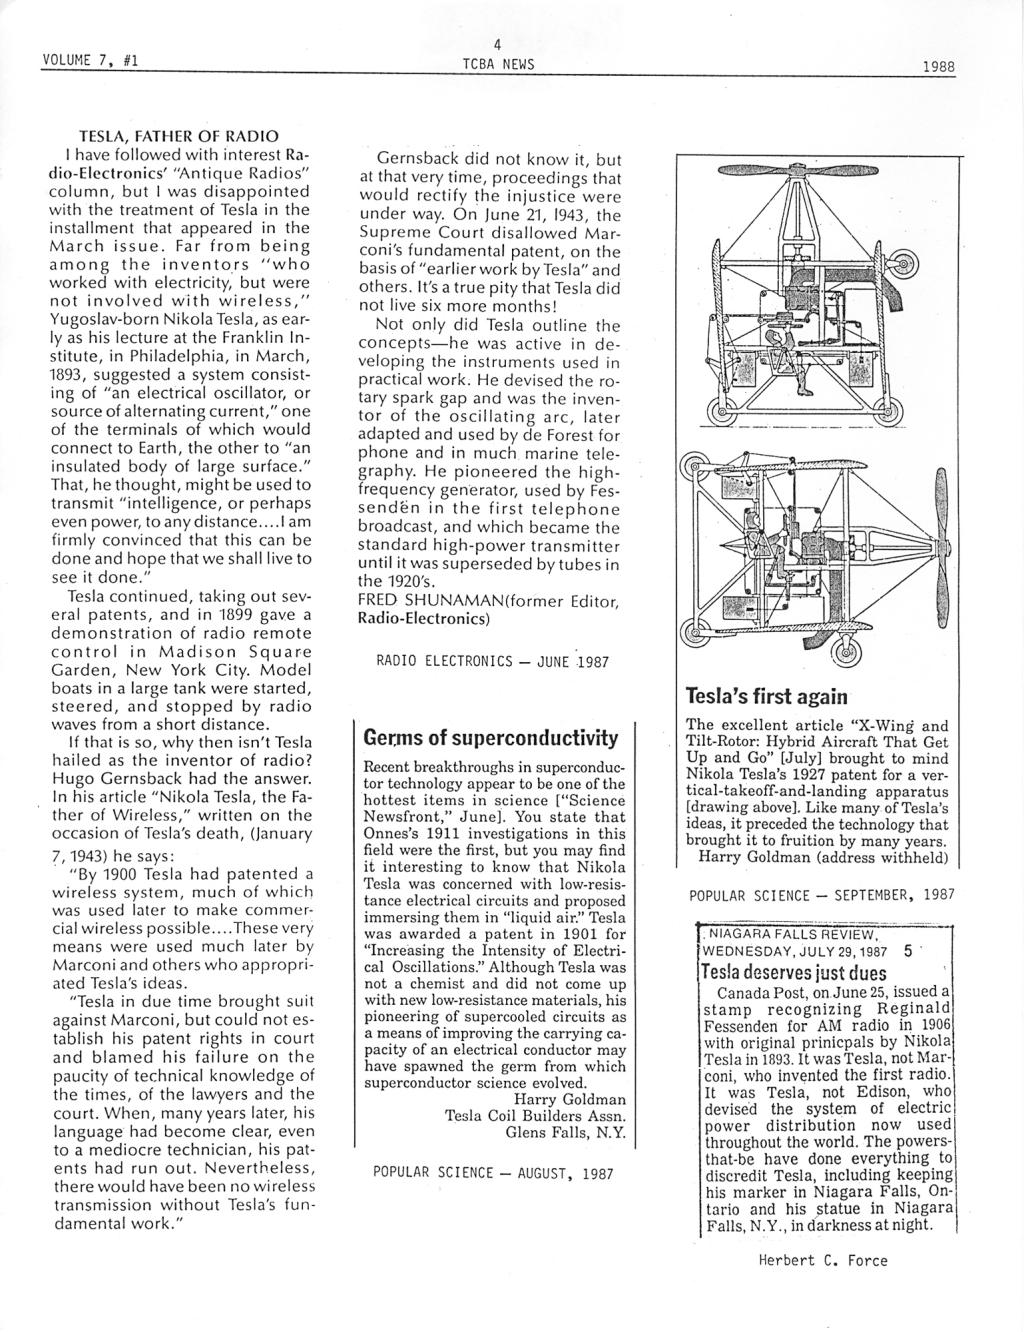 TCBA Volume 7 - Issue 1 - Page 4 of 18